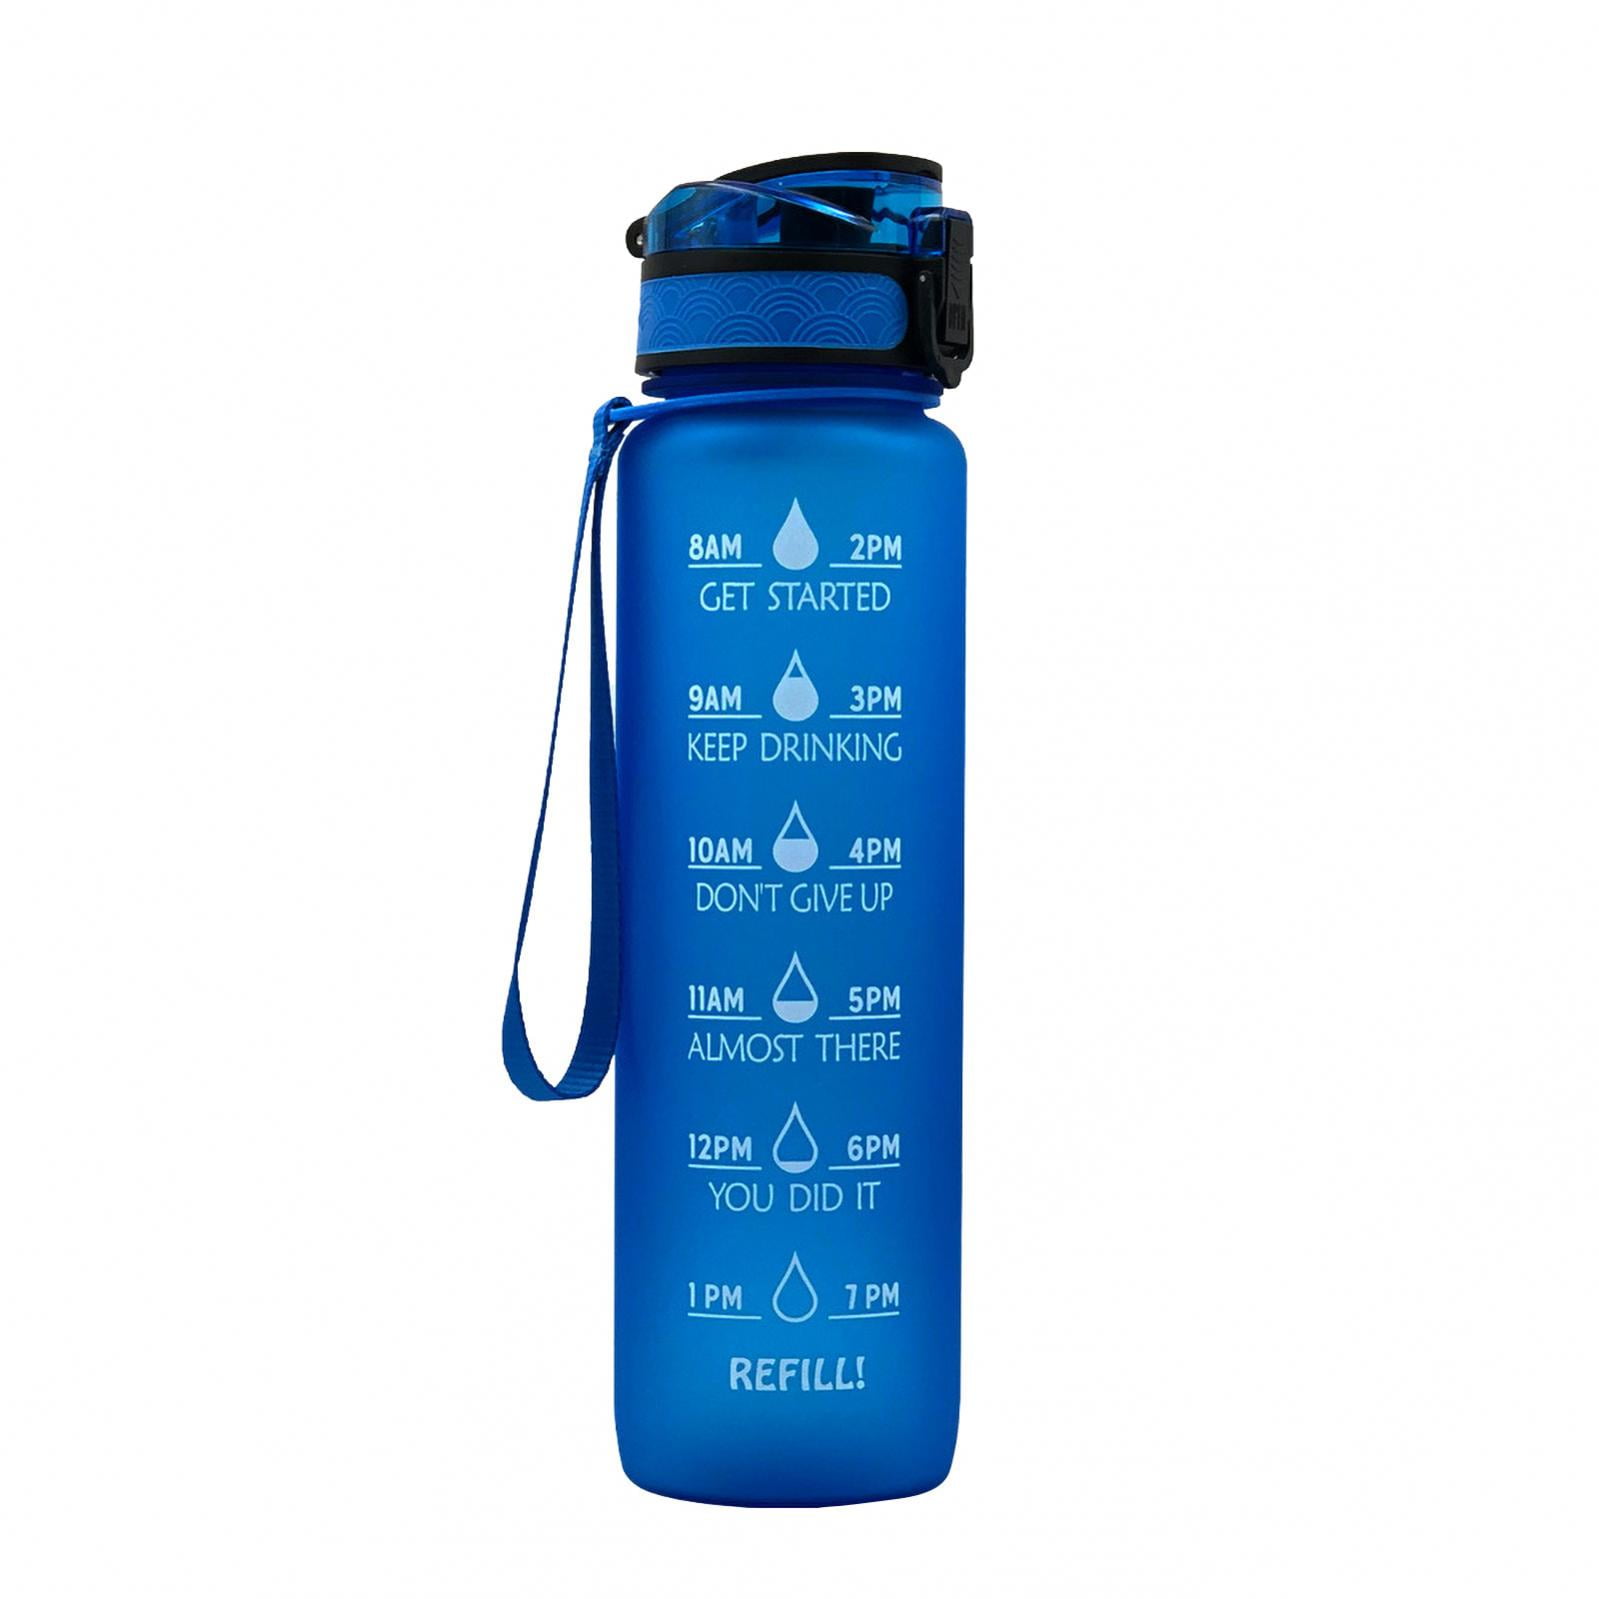 Evogen Blue Signature Shaker — Don't Leave Home Without It